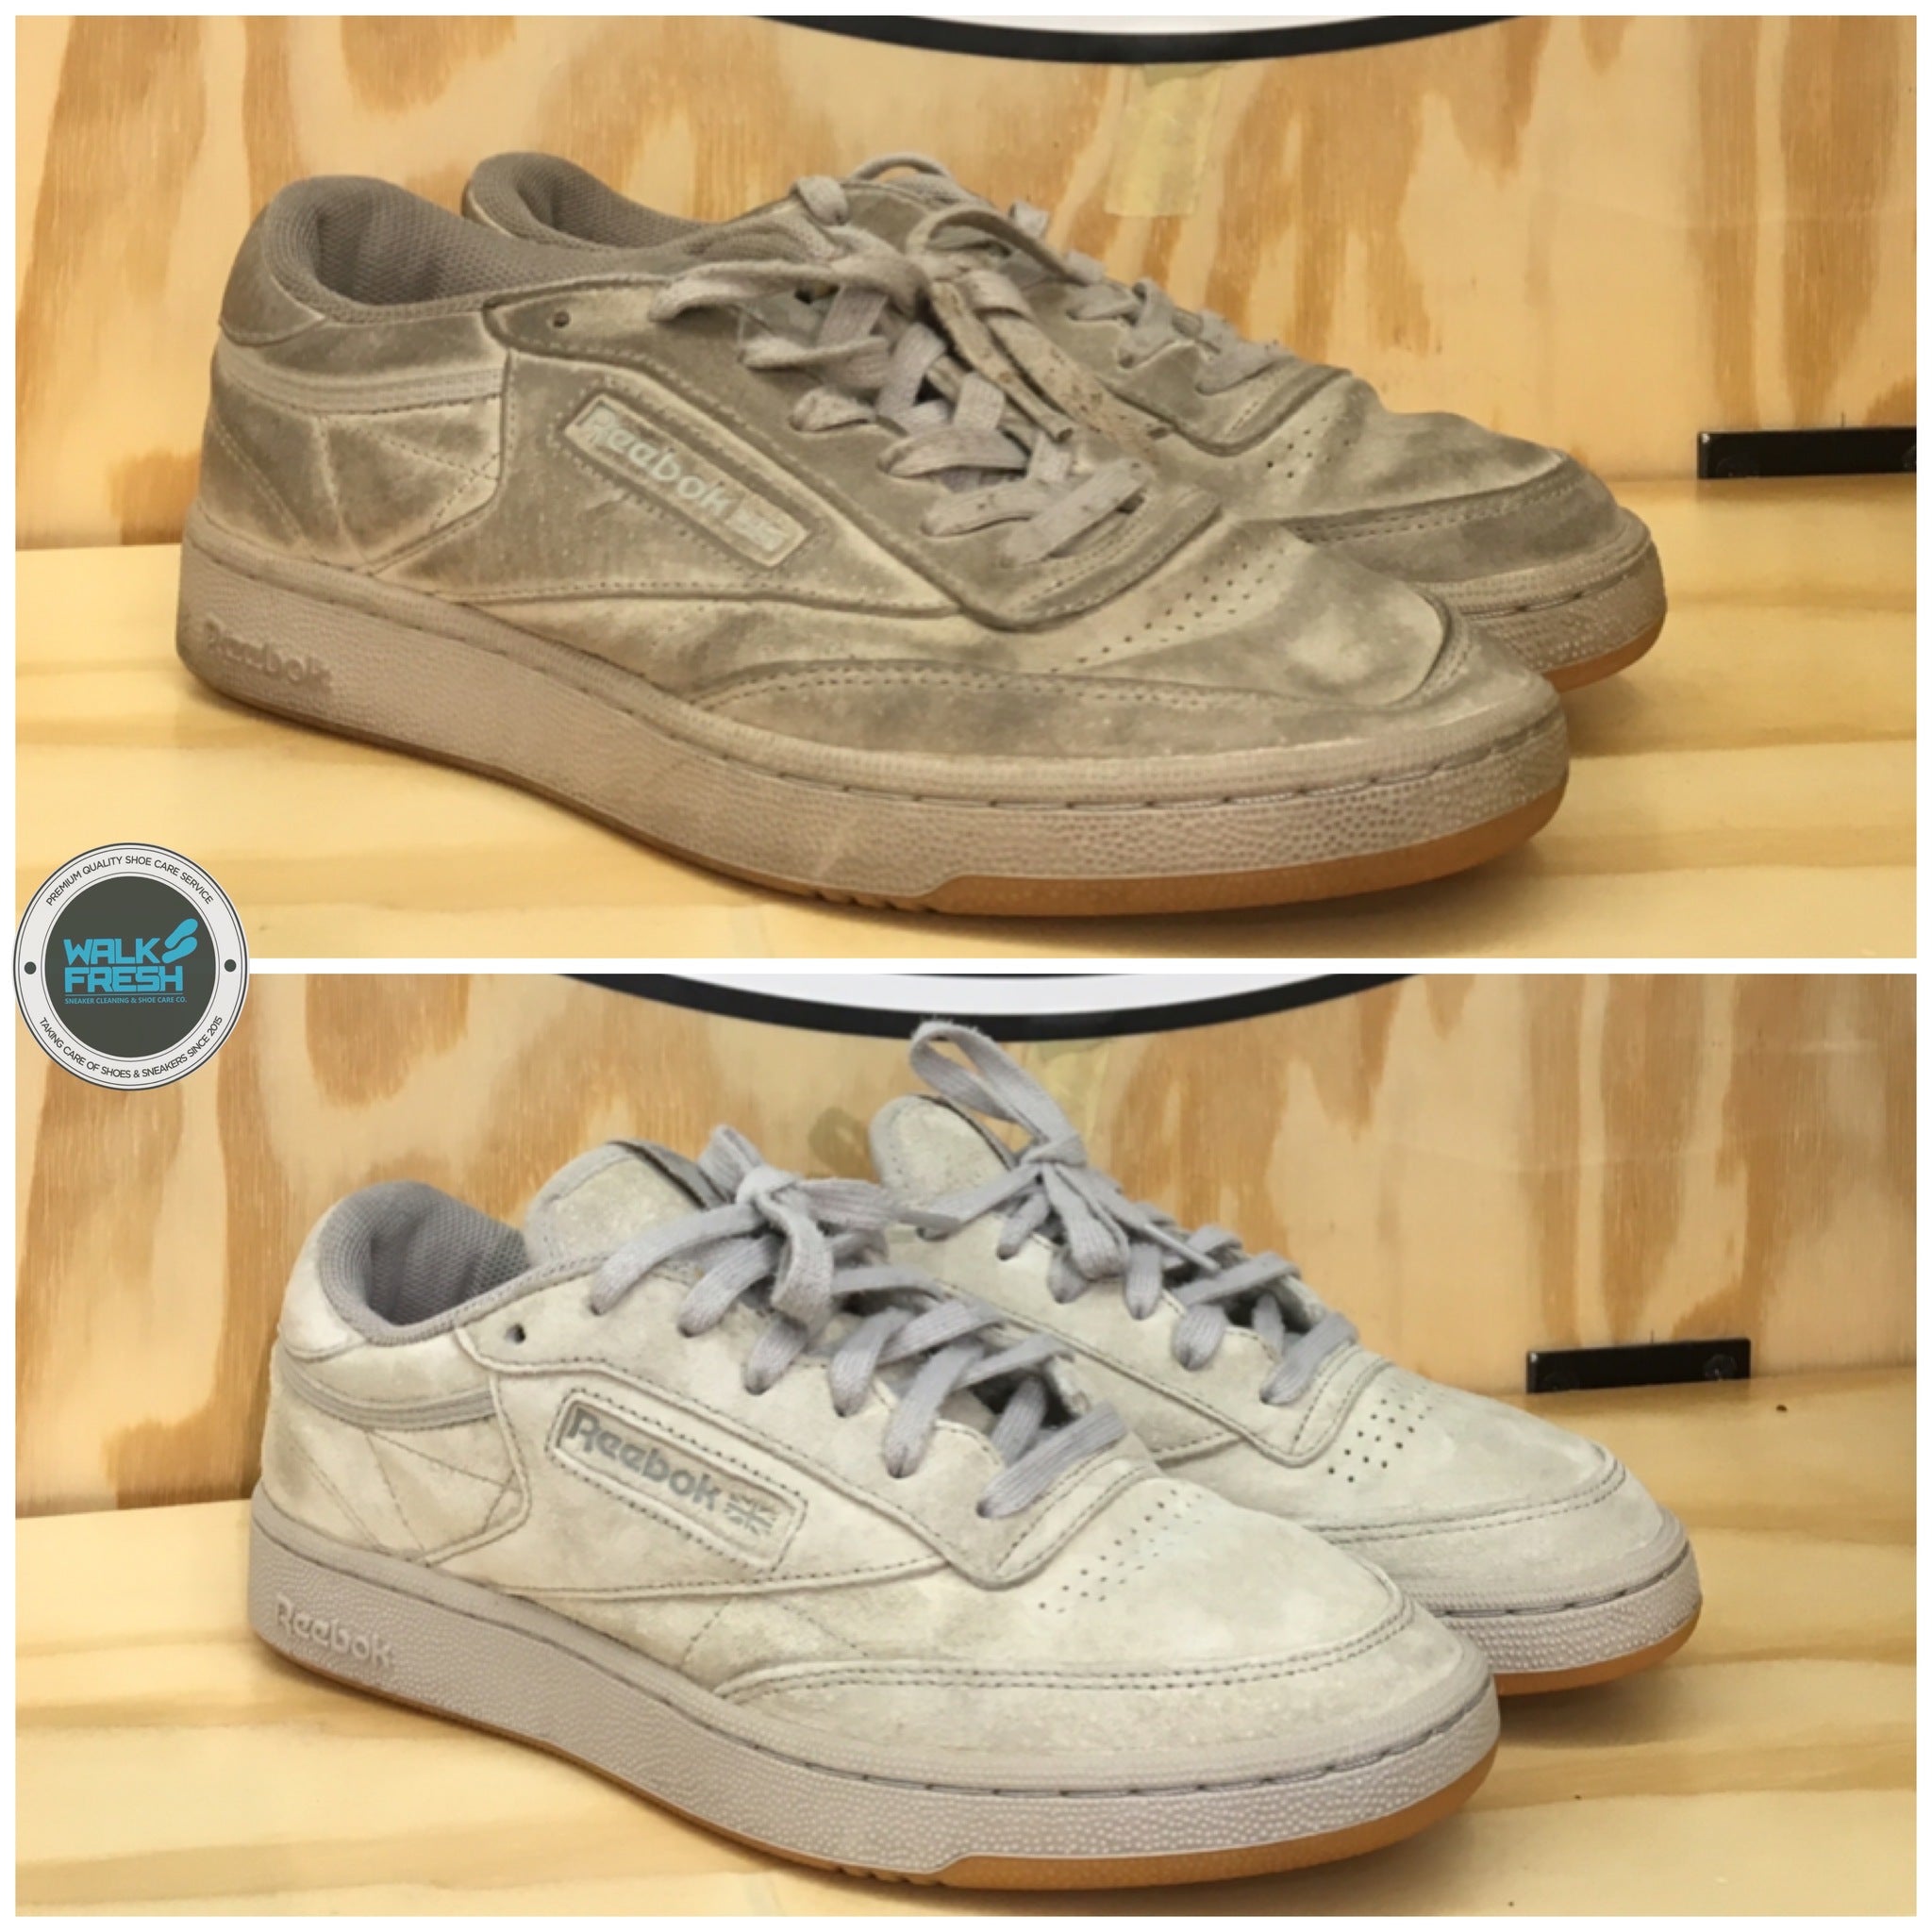 How To Clean Your Suede Sneakers | The BEST Way! - YouTube